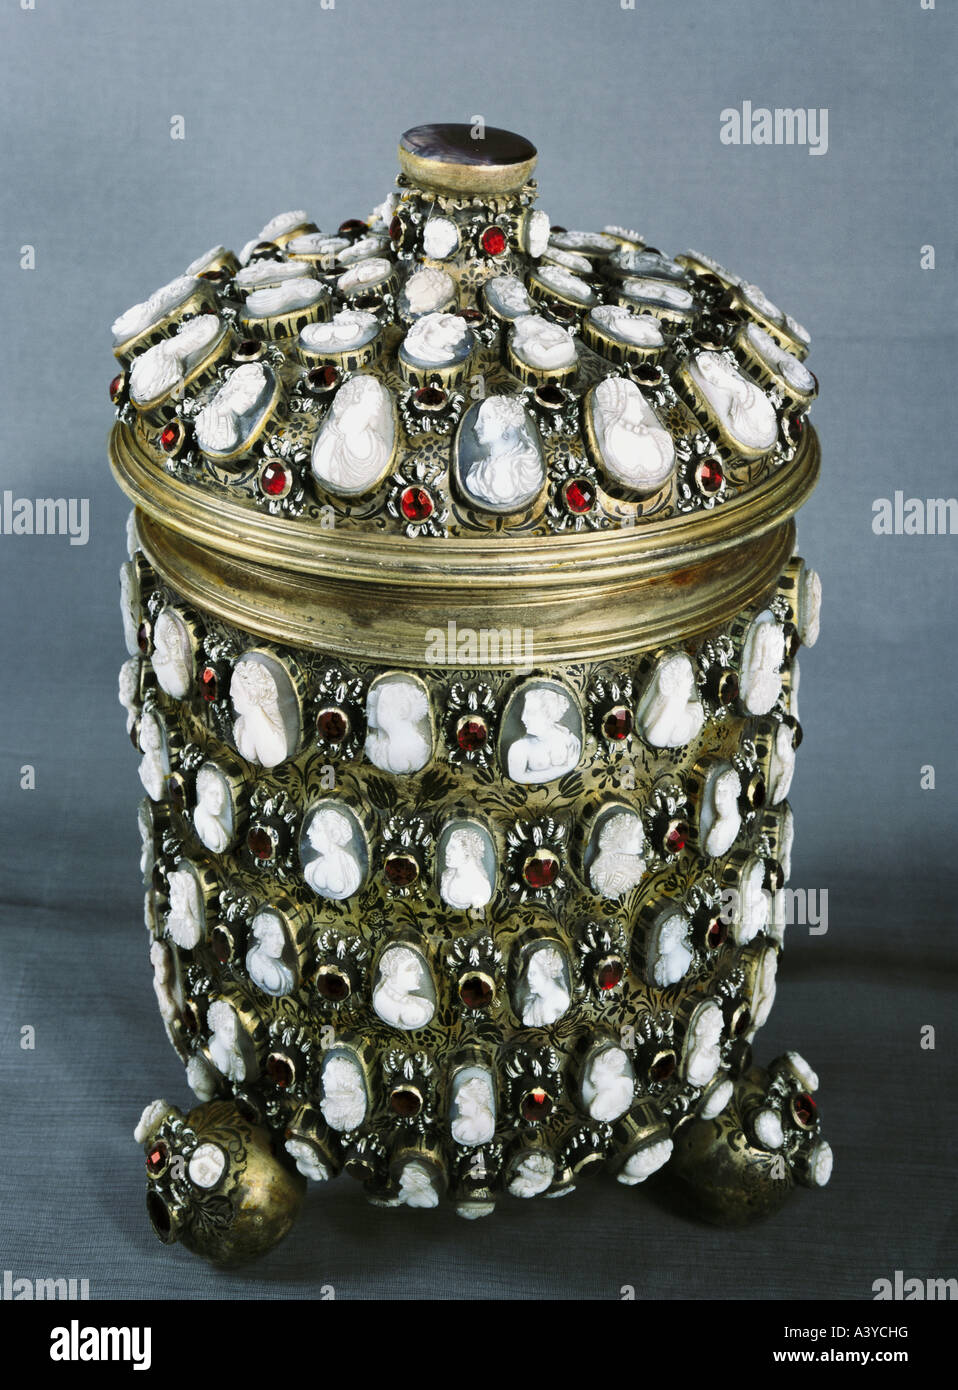 fine arts, centre piece, container, first half 17th century, gilded silver, ruby, cameos, Swedish treasure chamber, castle, Stoc Stock Photo